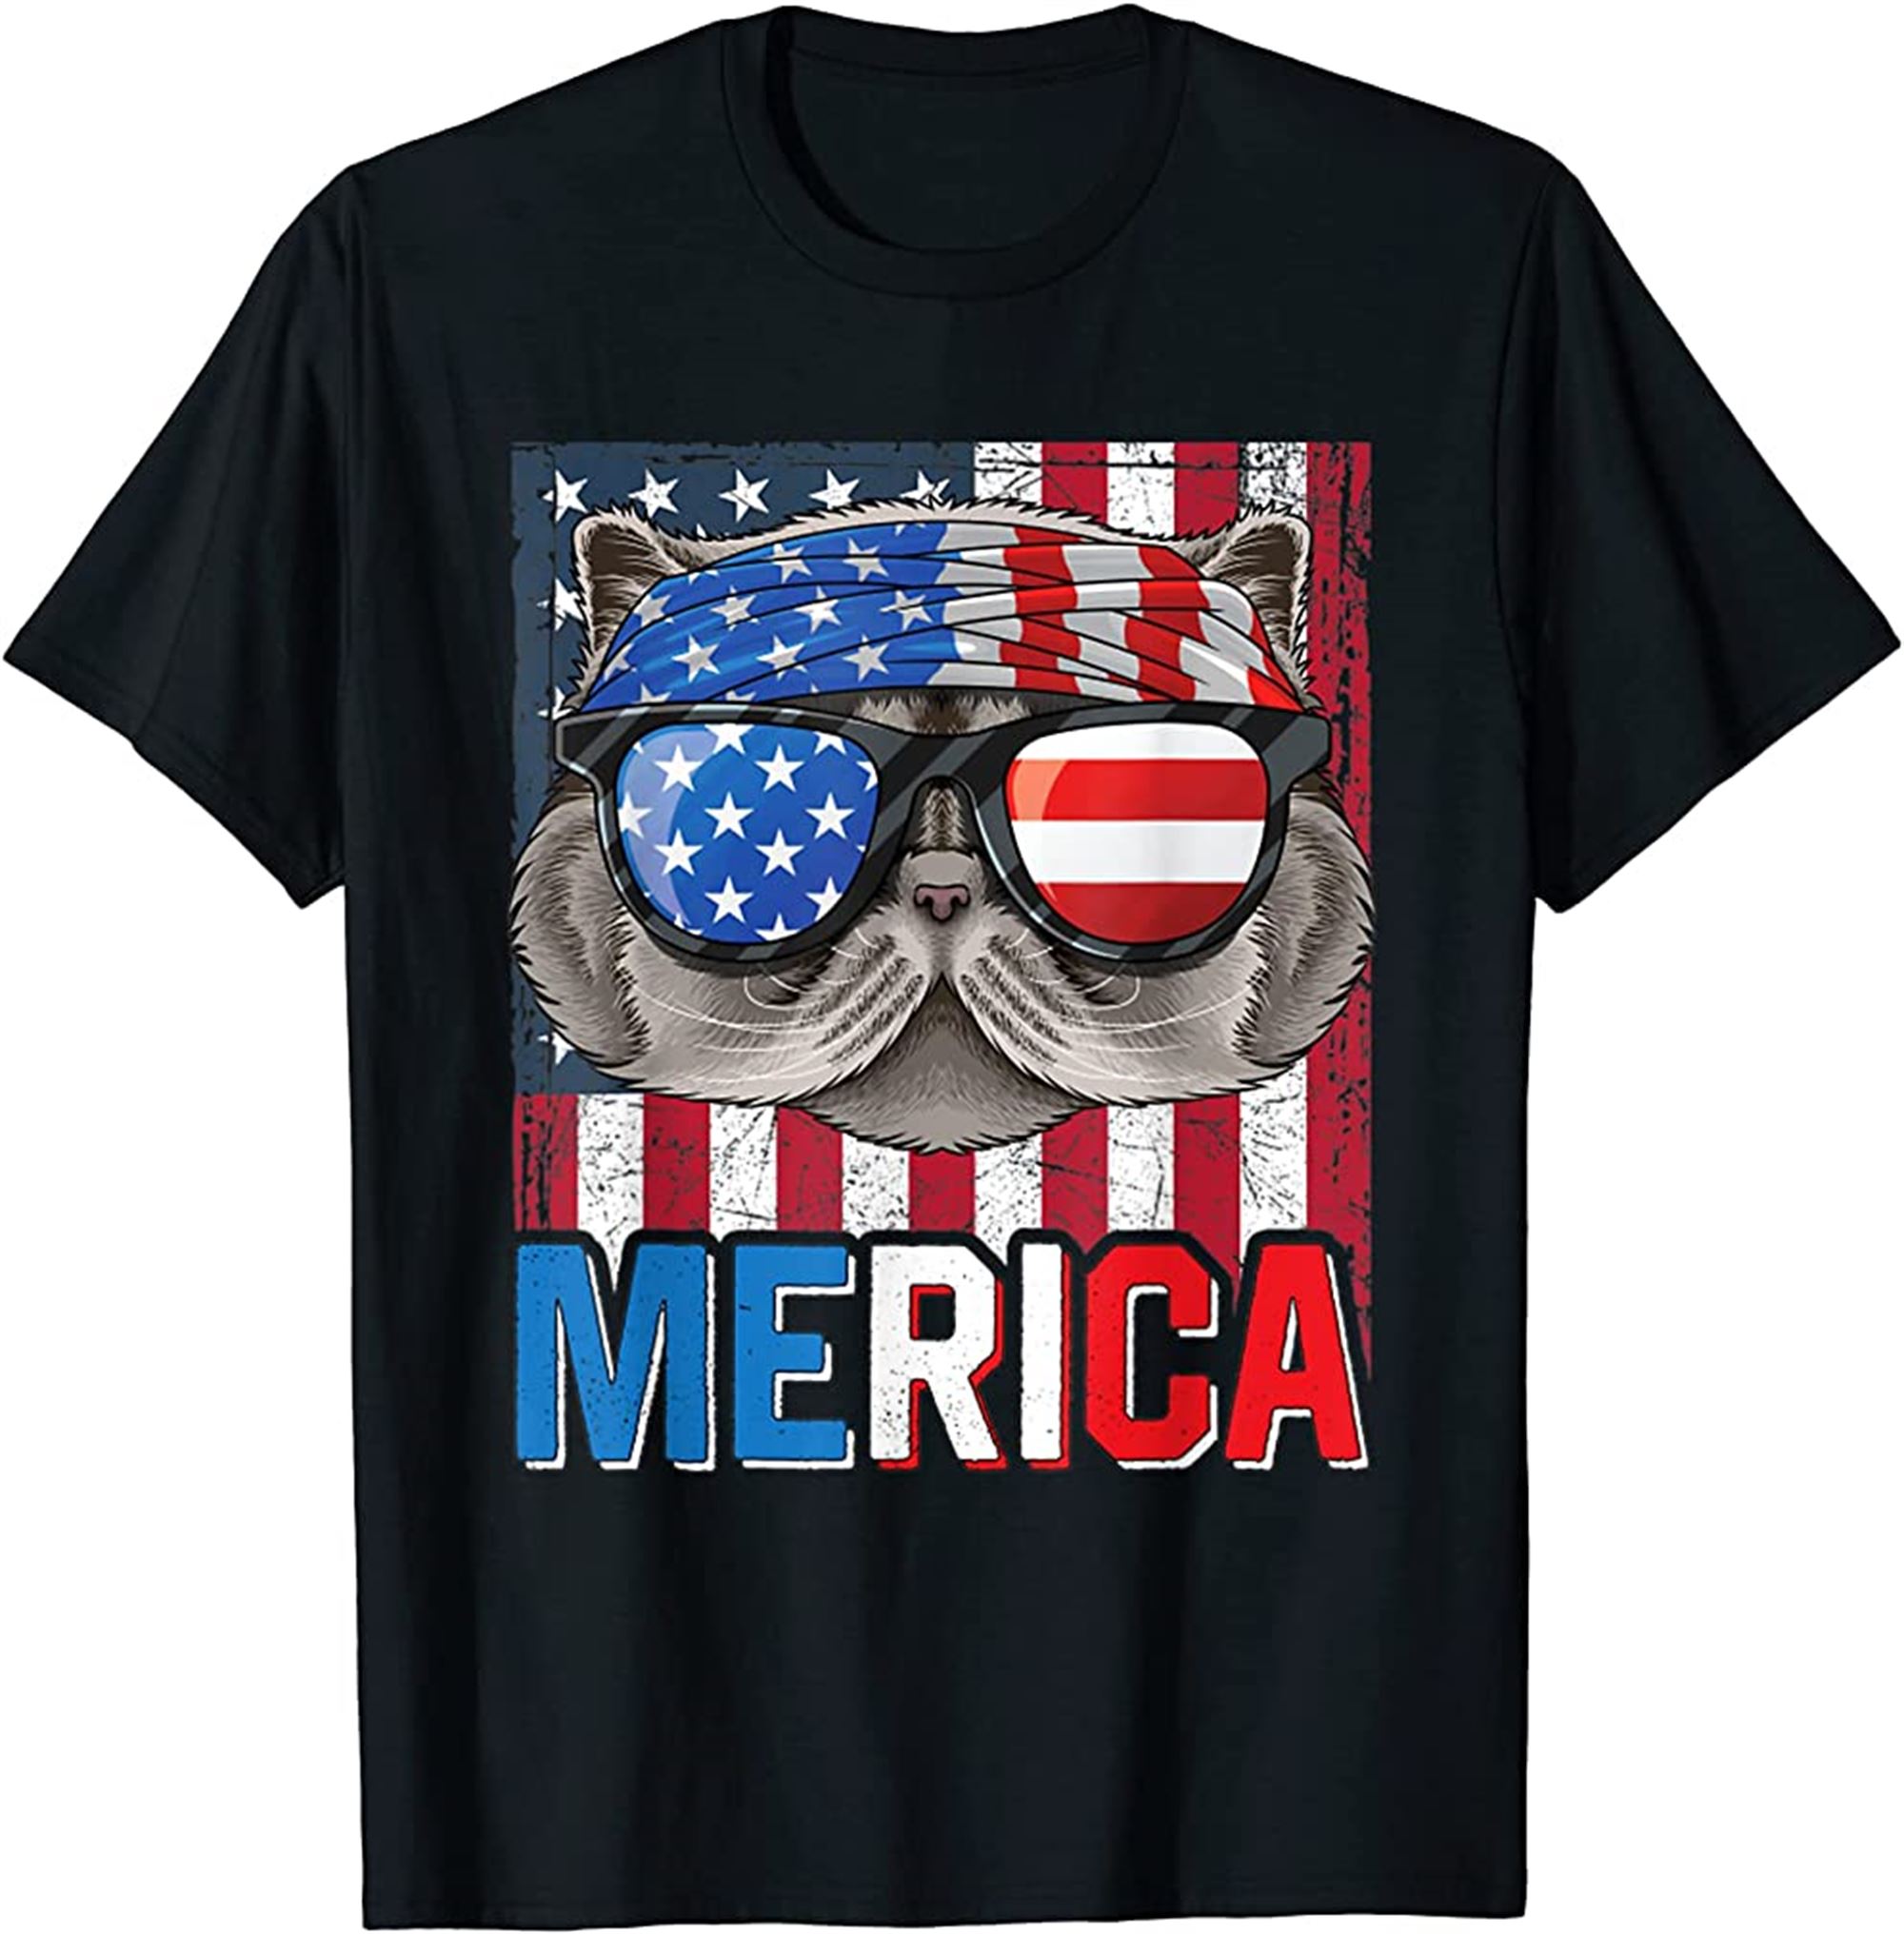 Merica Persian Cat 4th Of July Gifts American Flag T-shirt Size Up To 5xl